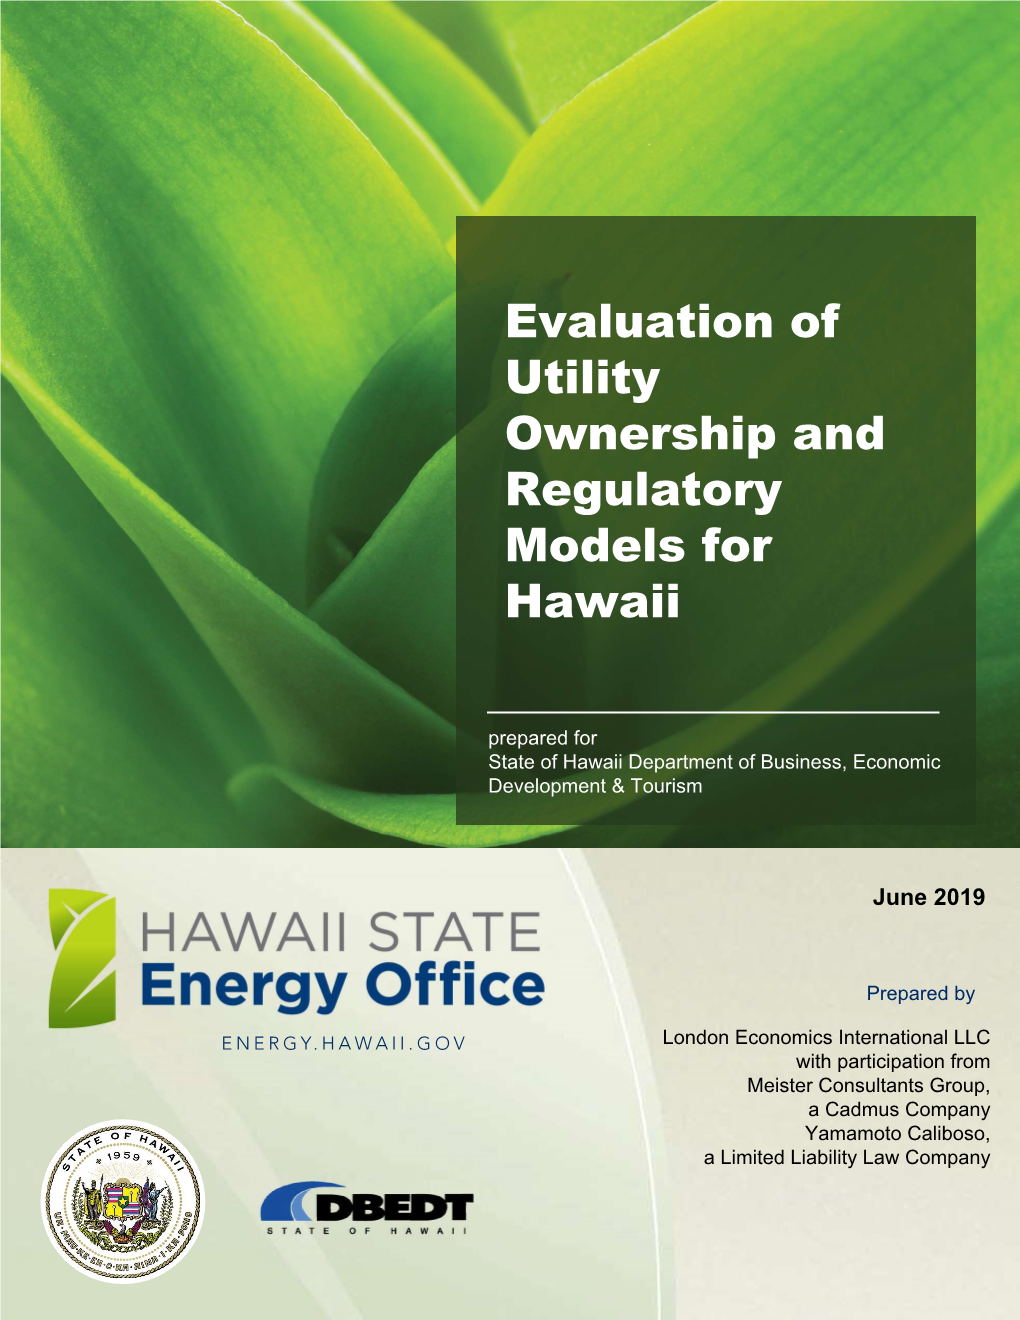 Evaluation of Utility Ownership and Regulatory Models for Hawaii